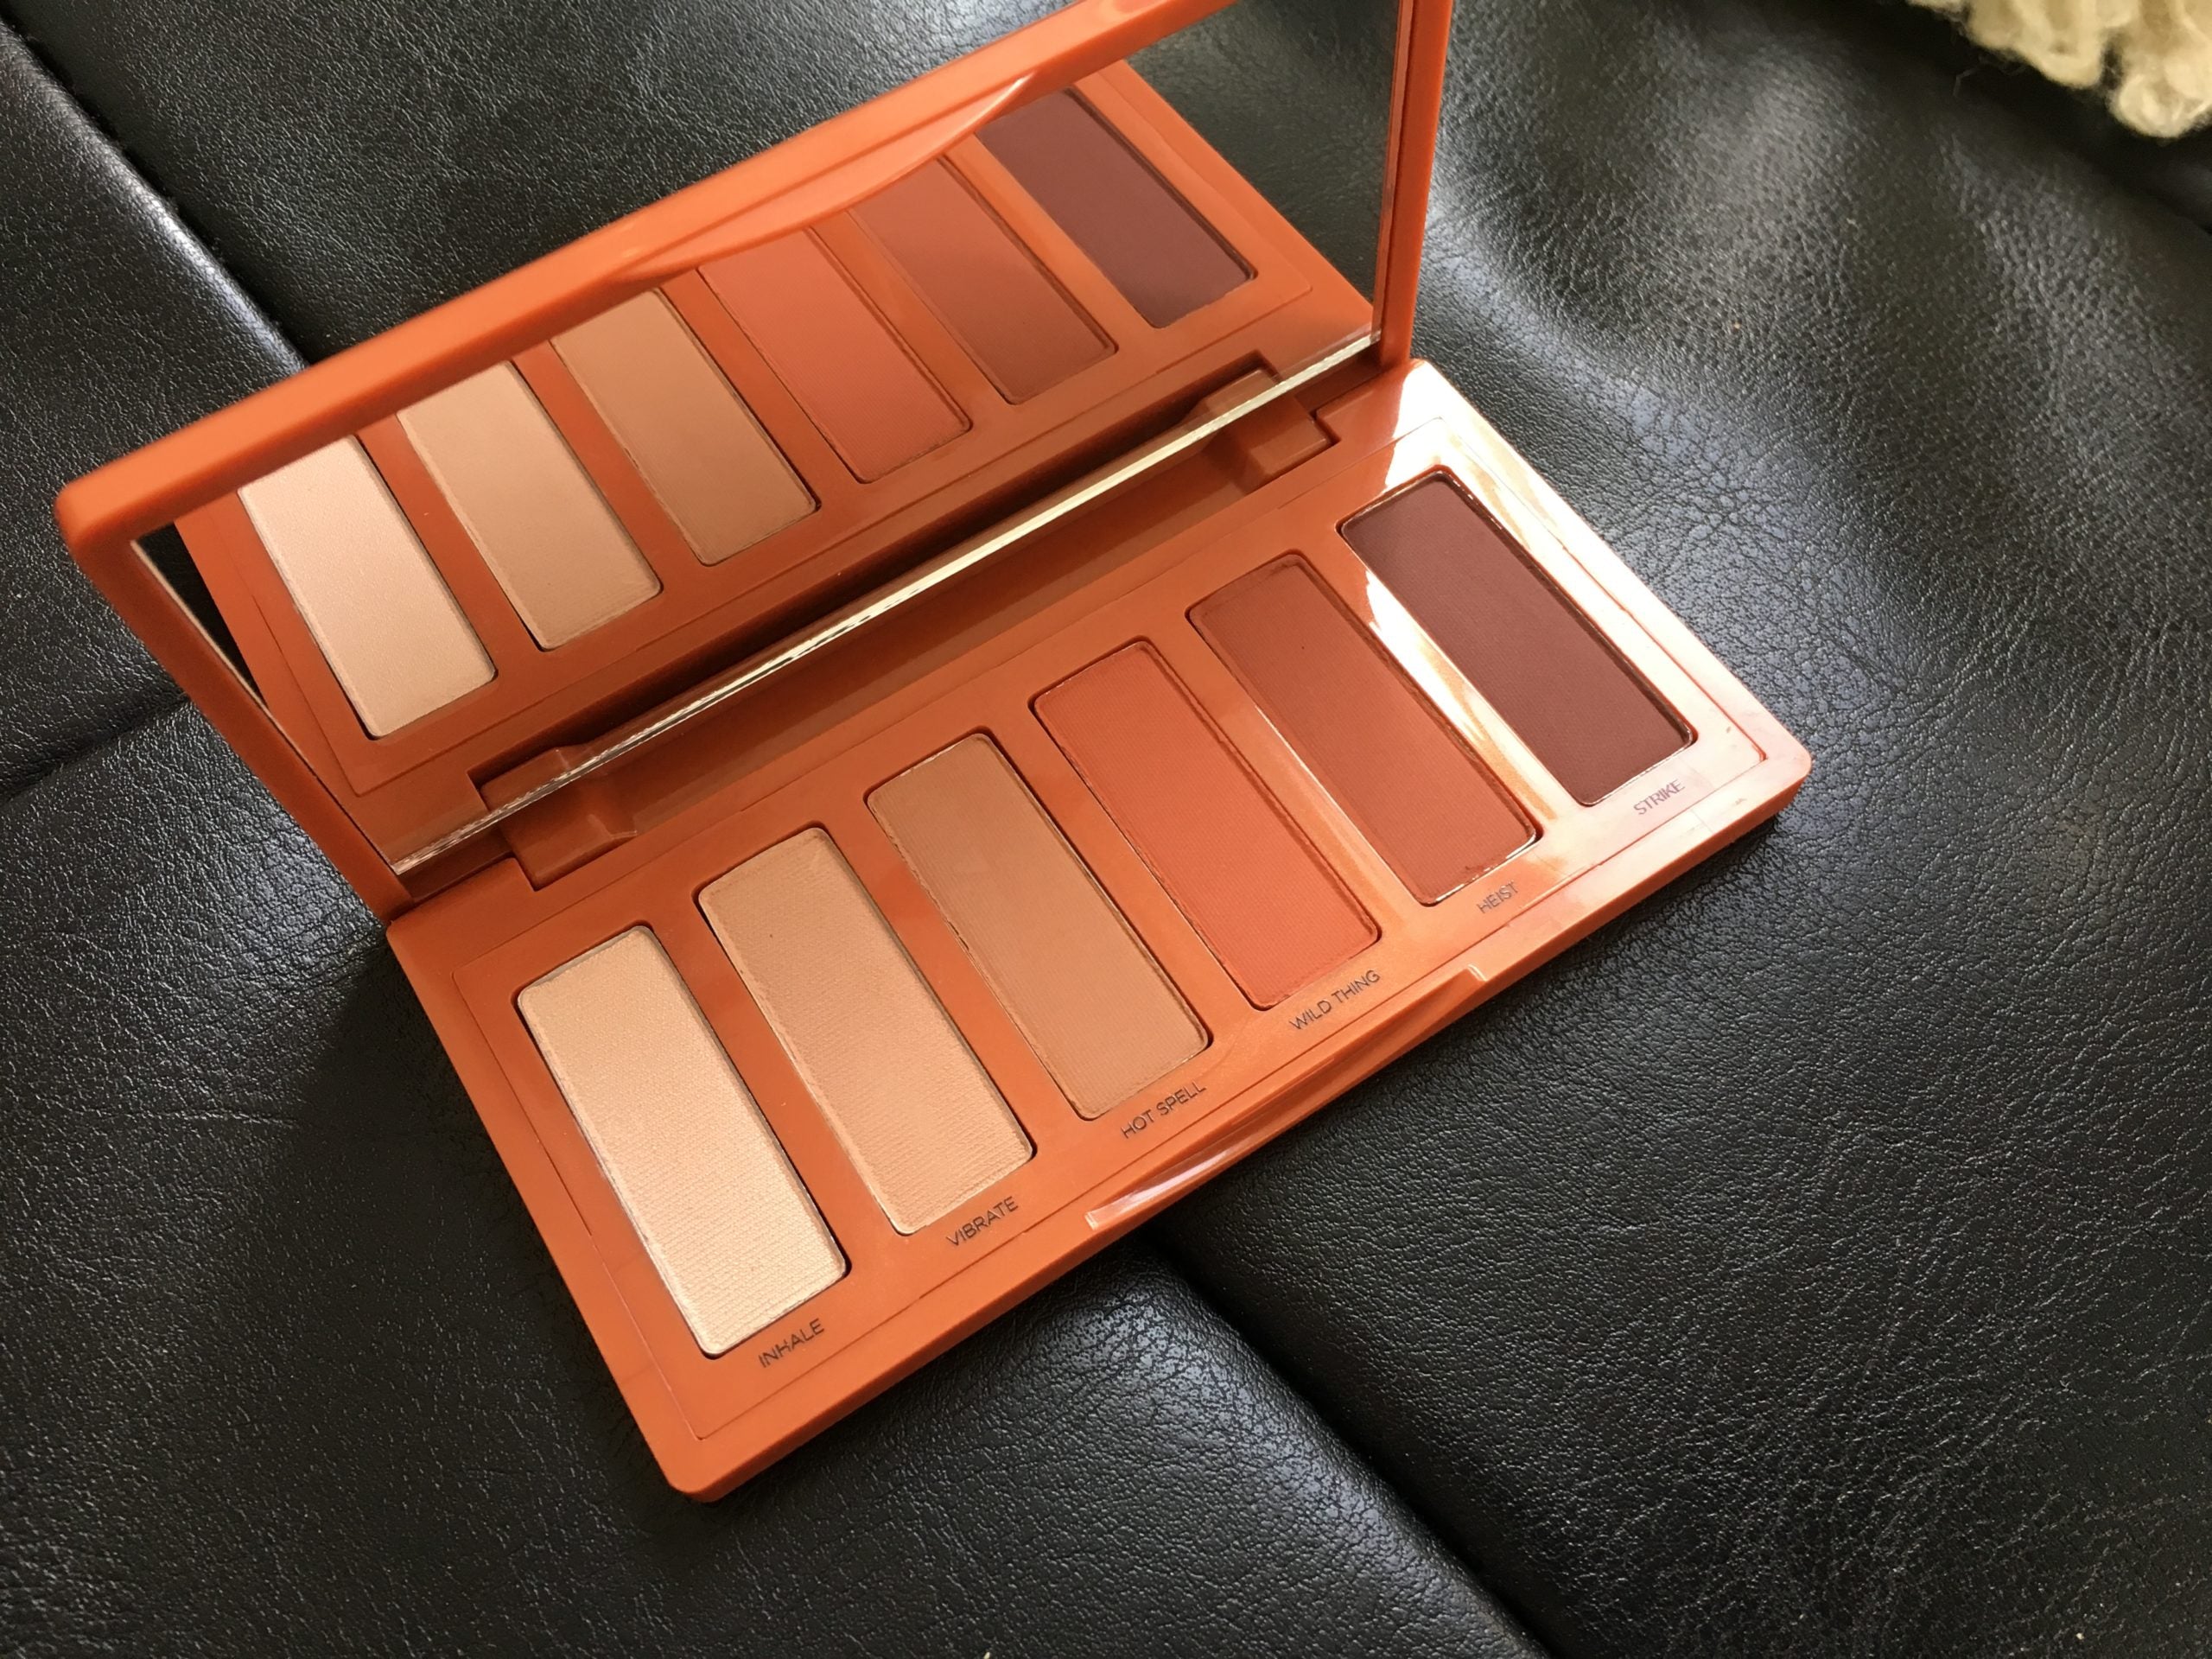 Review, Swatches, Photos, Makeup Trends 2018, 2019, 2020: Create Easy Warm Neutral Eyeshadow Looks, Urban Decay, Petite Heat Palette